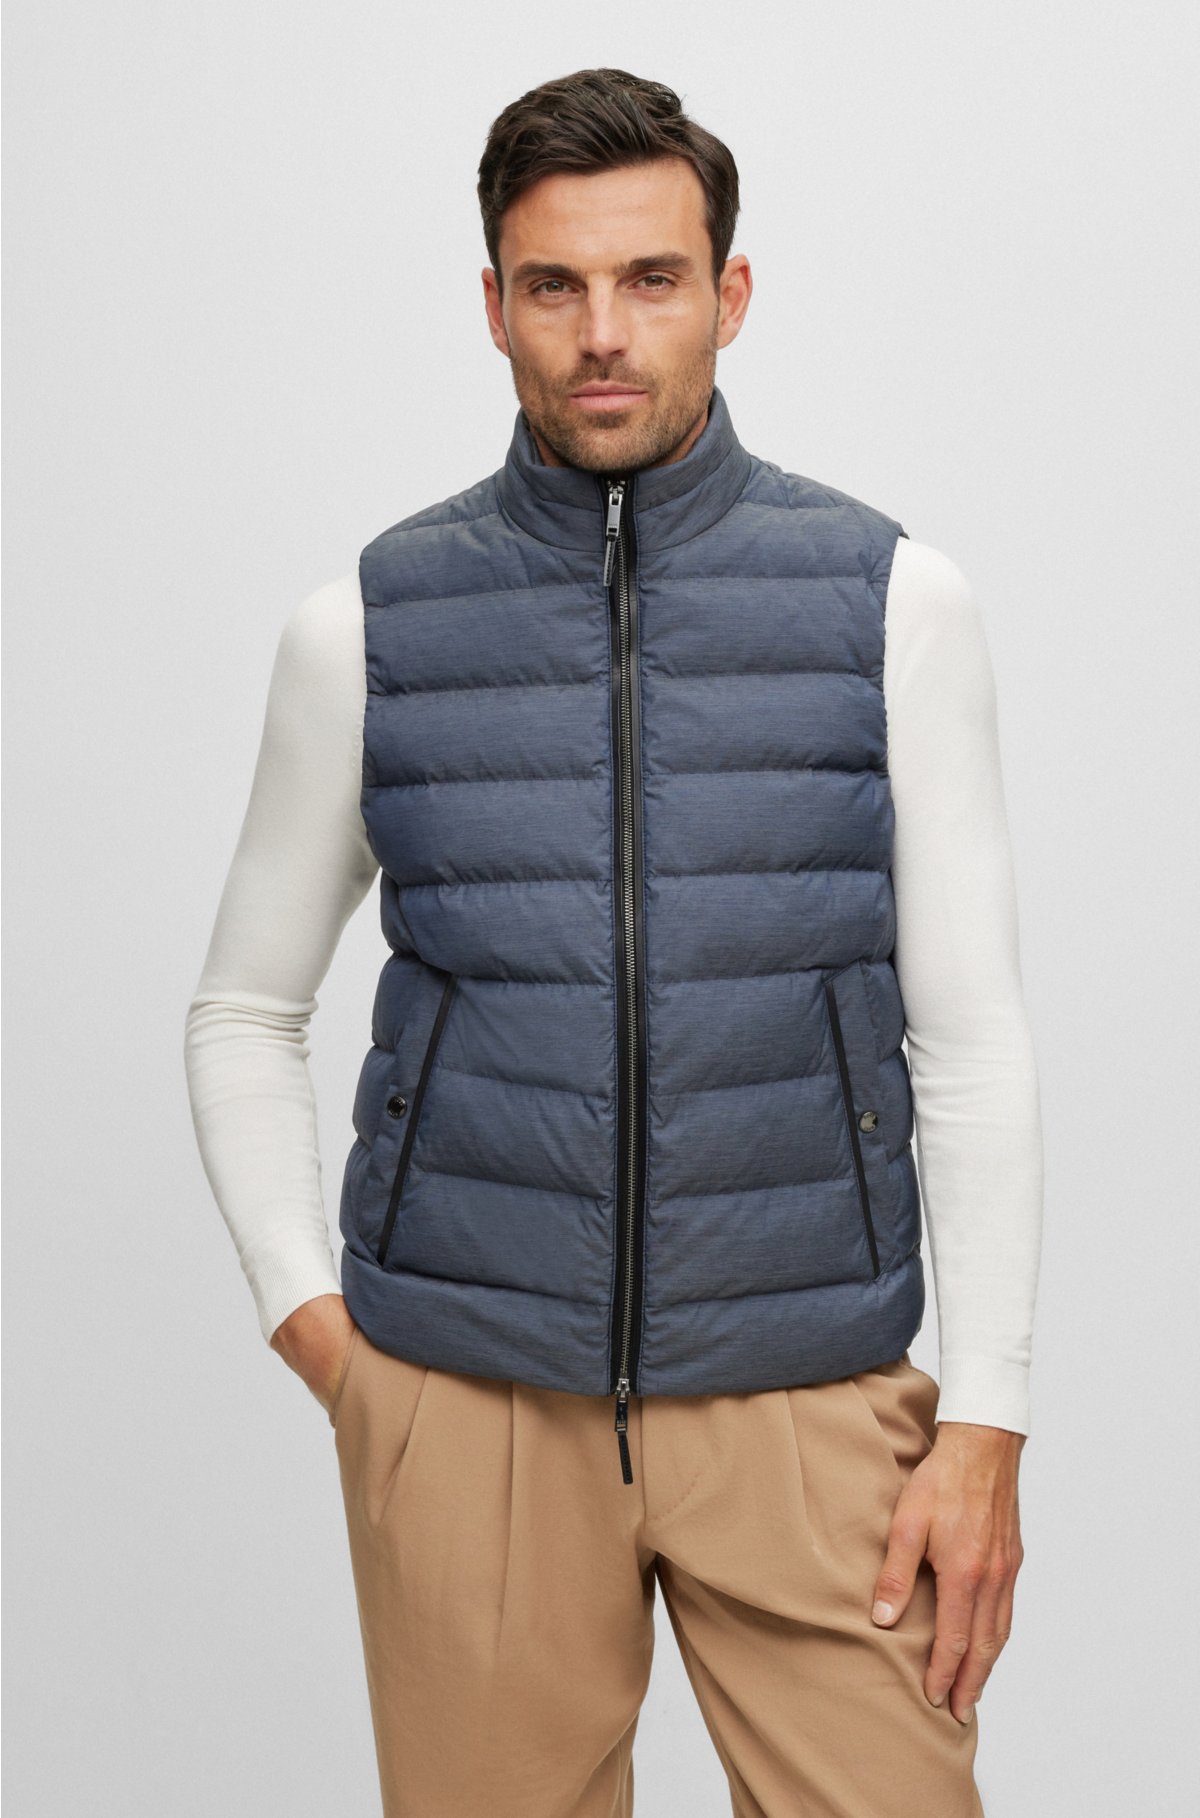 BOSS - Melange gilet with tailored details